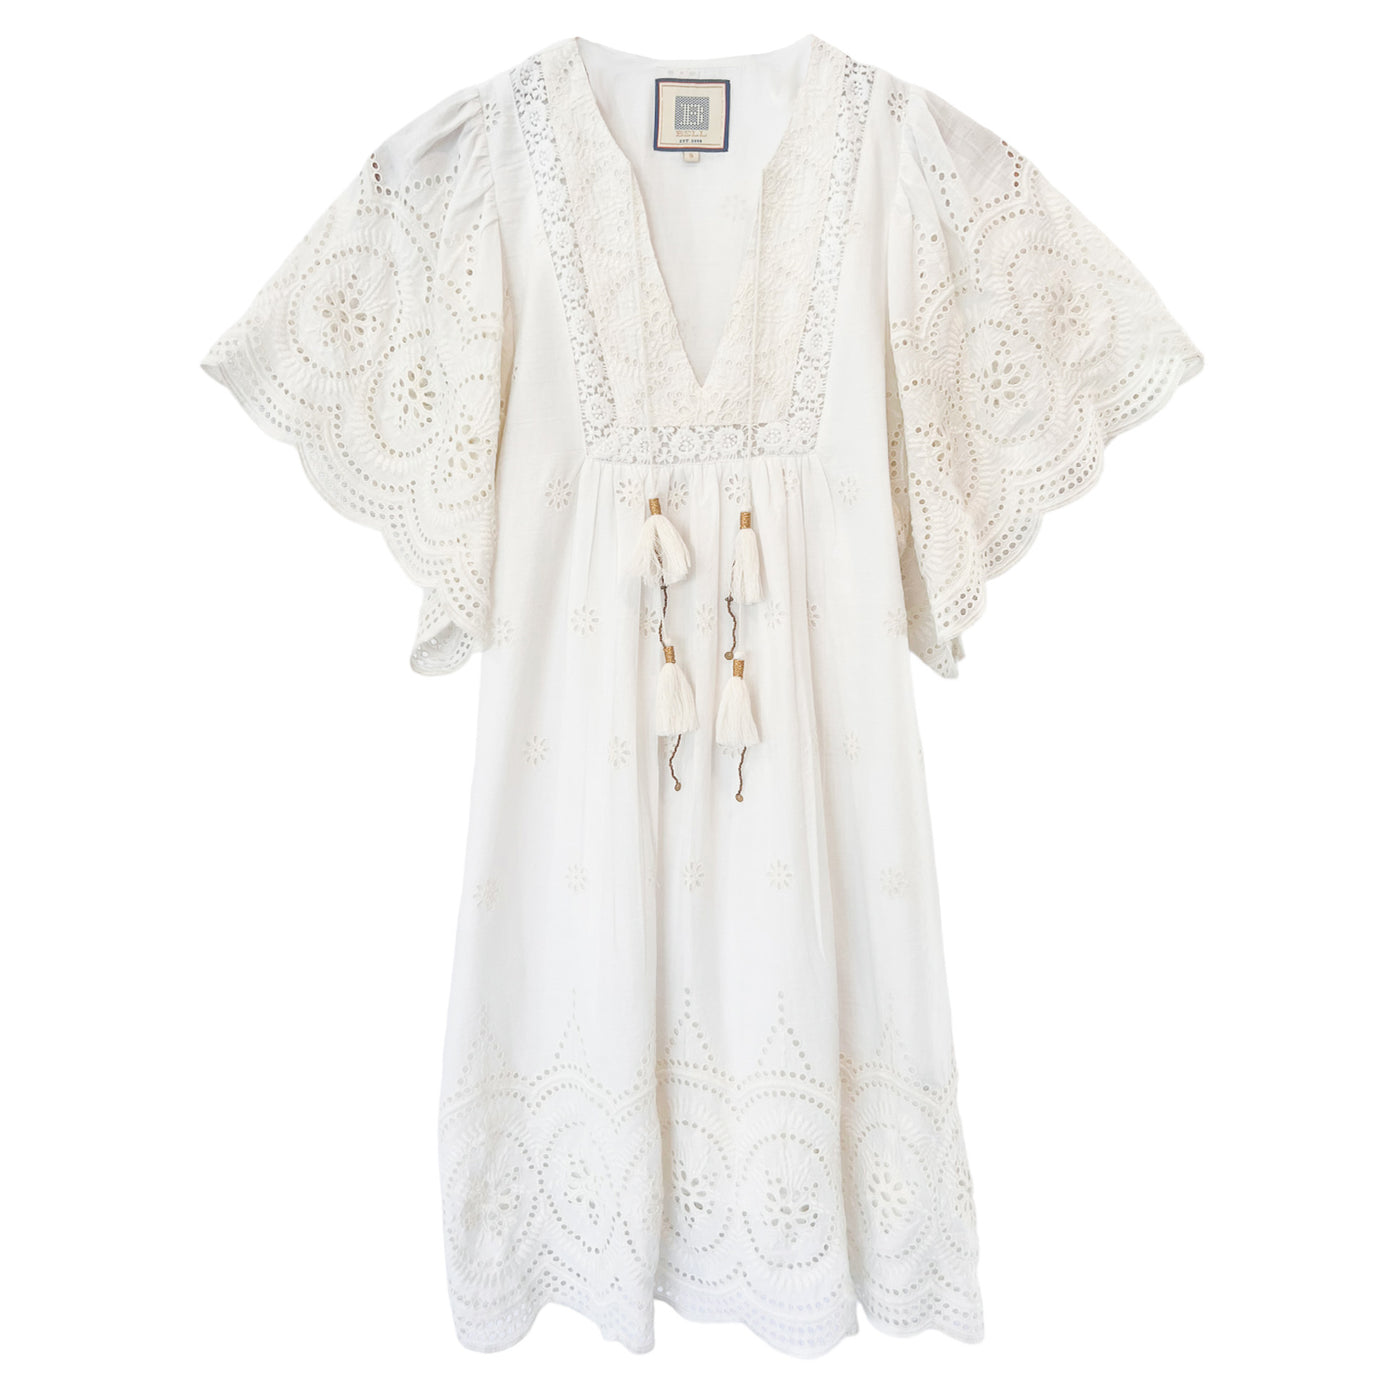 ANGEL DRESS IN WHITE EYELET - Romi Boutique